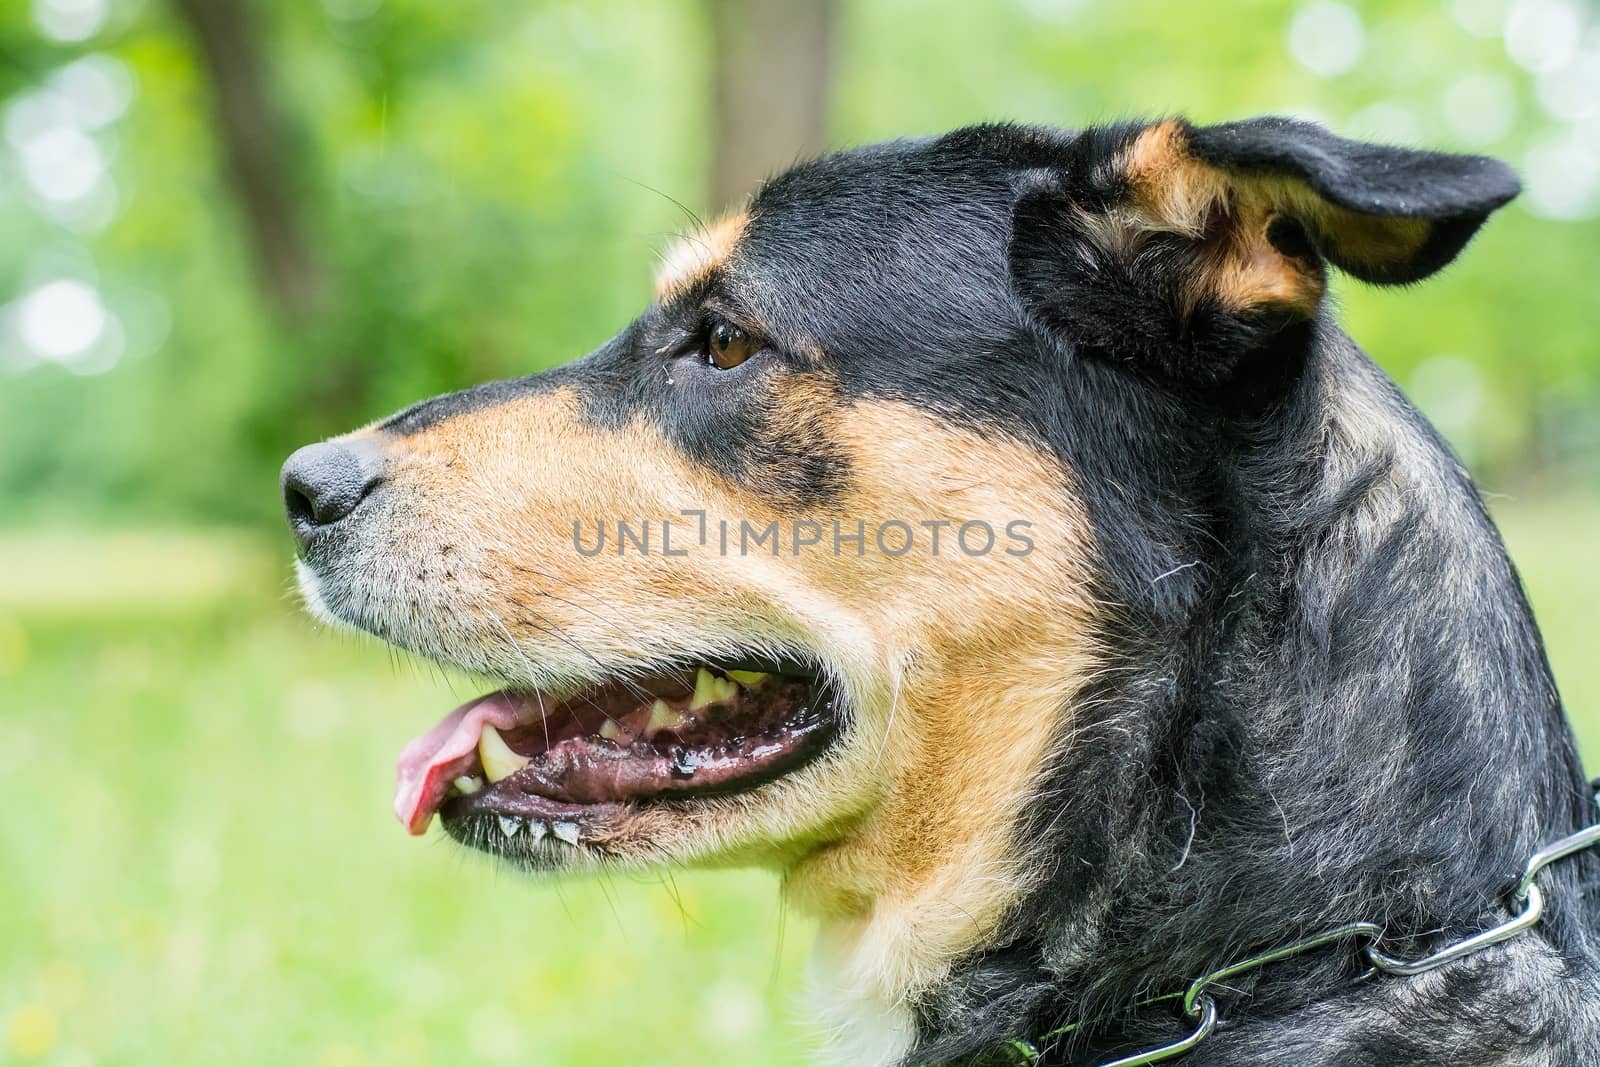 Dog portrait with green background.